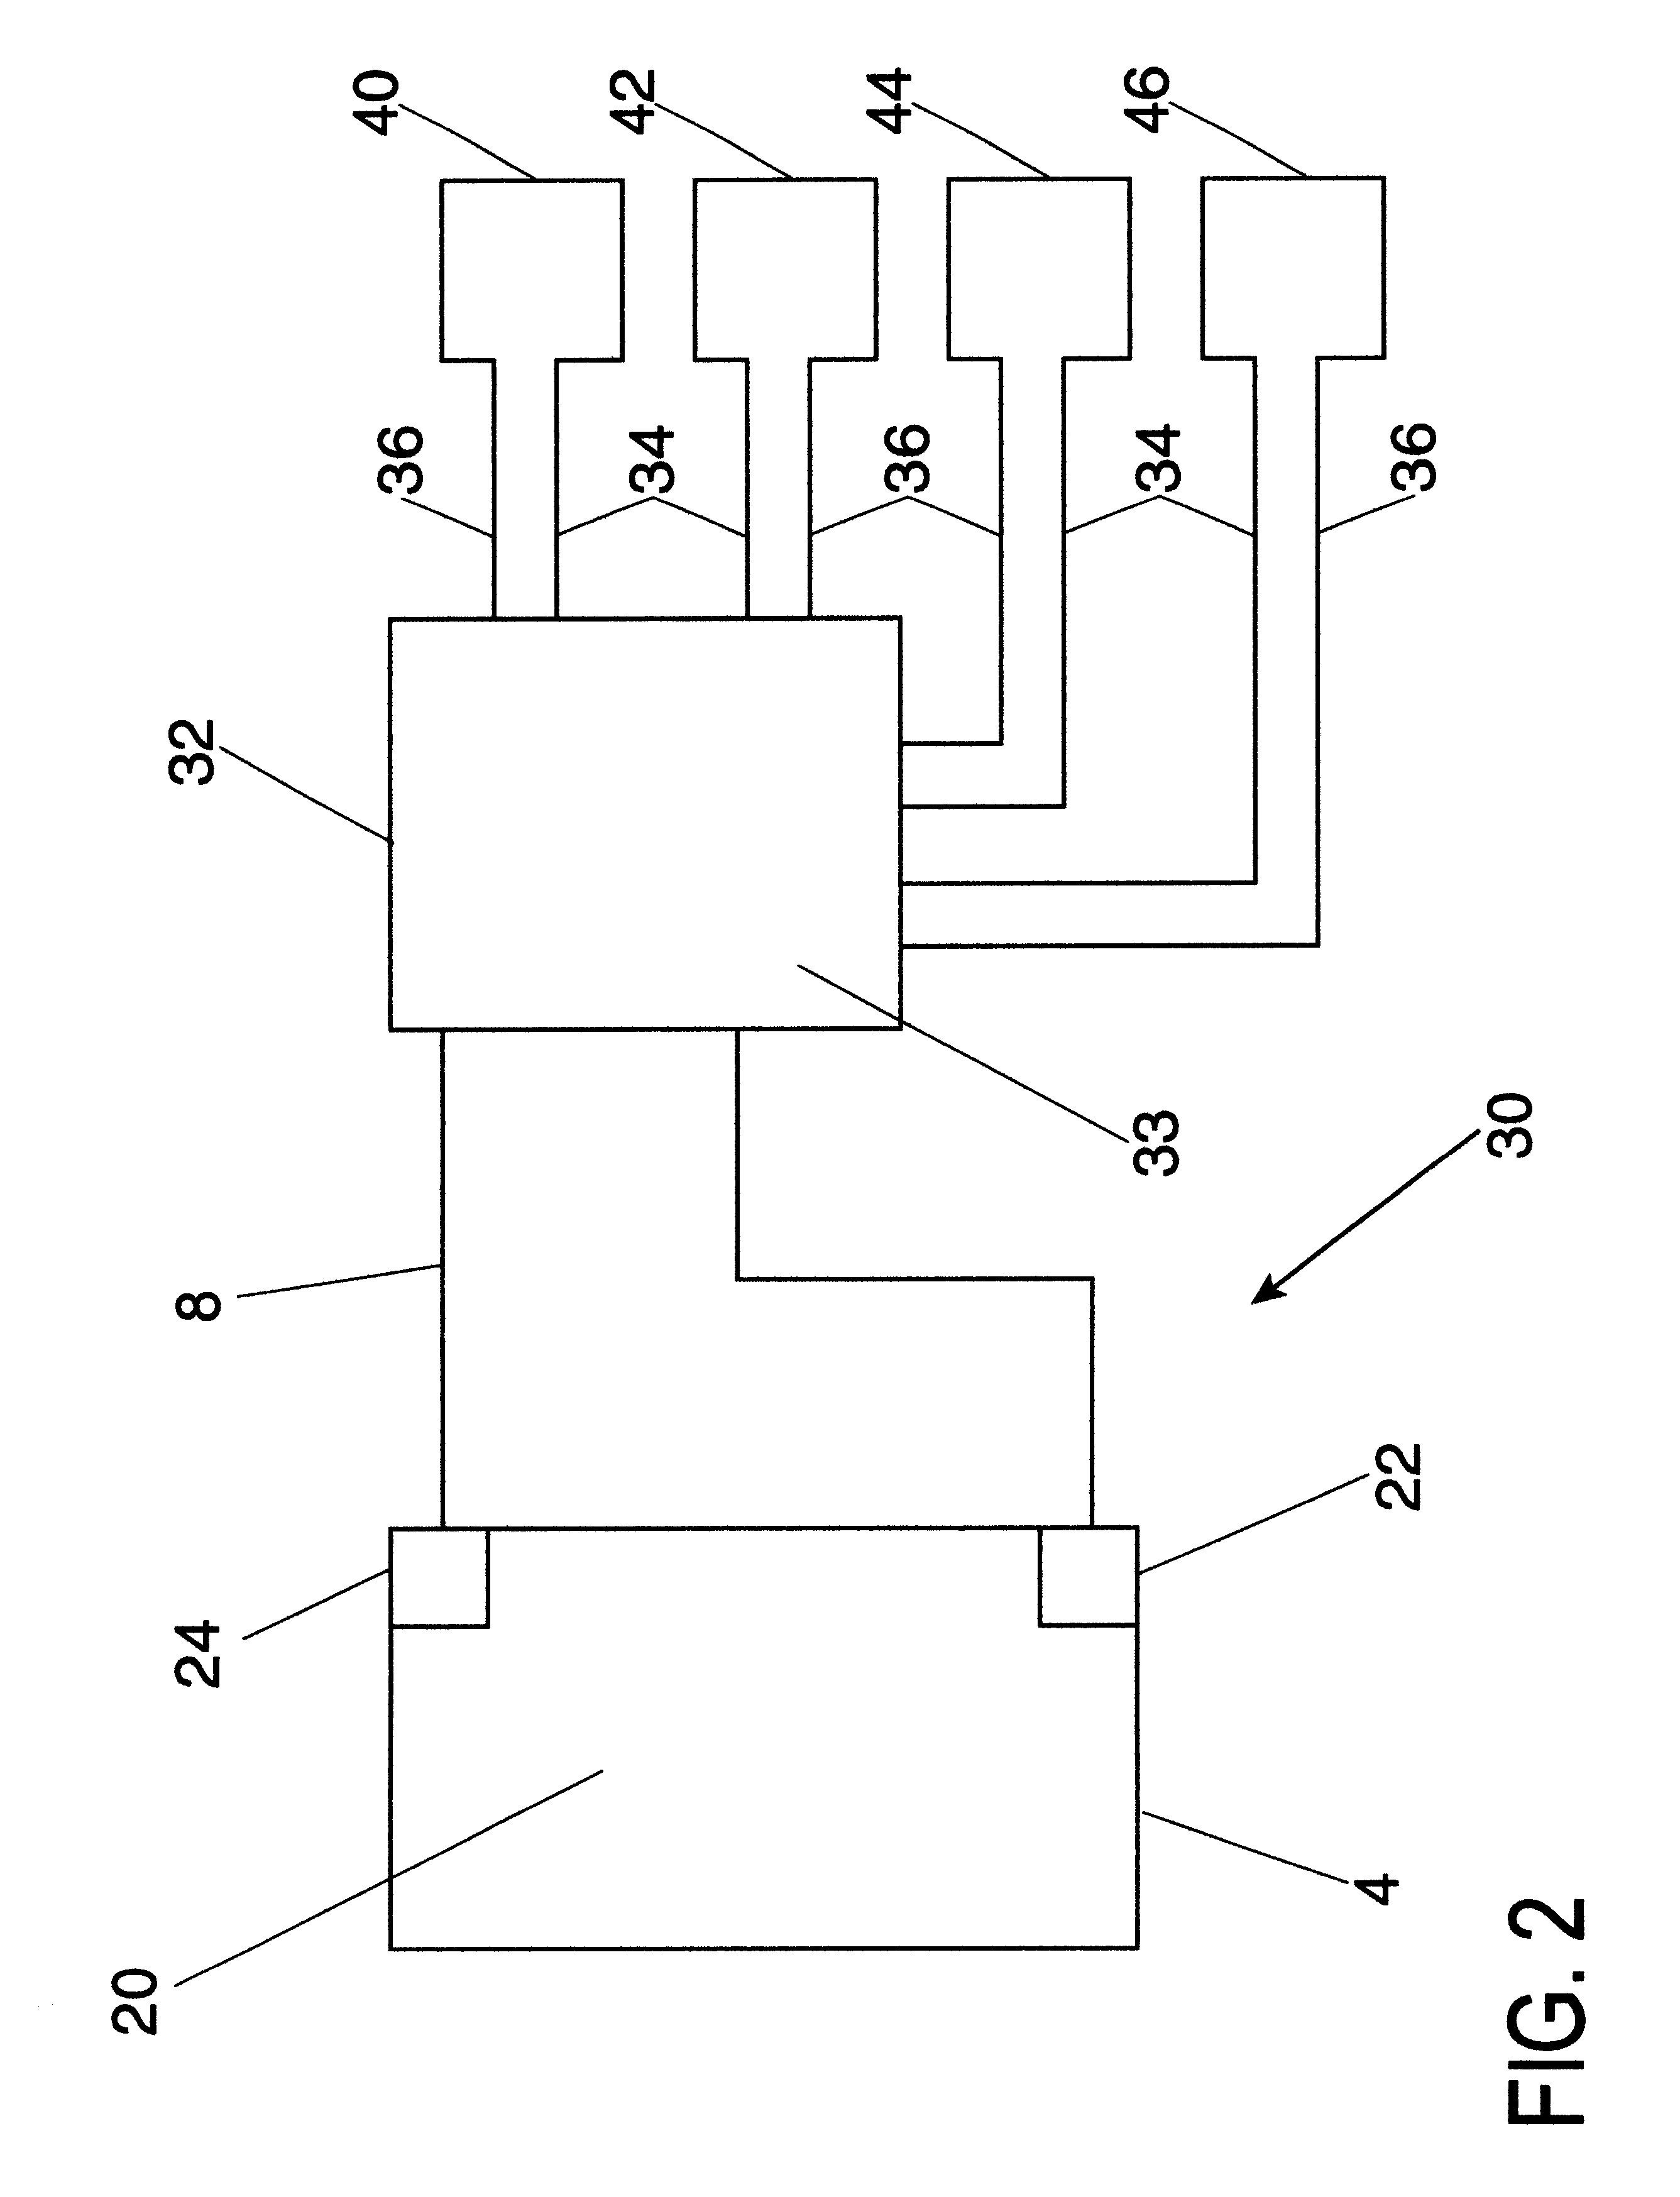 Method and apparatus for interfacing multiple peripheral devices to a host computer